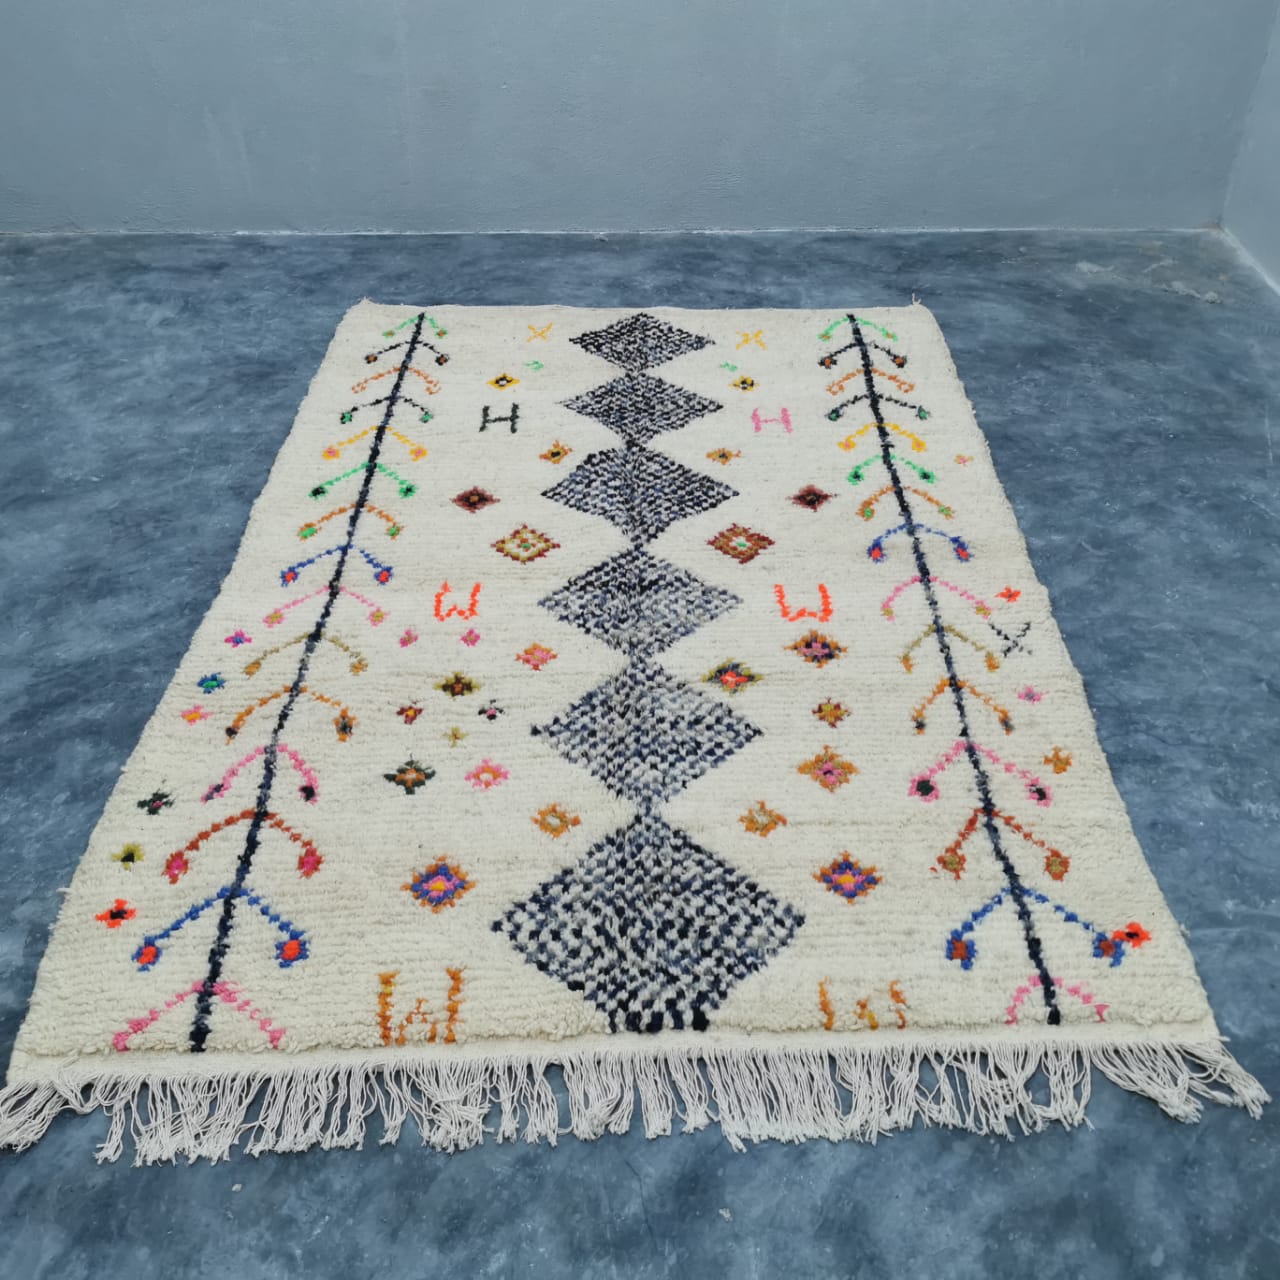 Timeless Moroccan Rugs Shop Beni Ourain and Boujad Styles